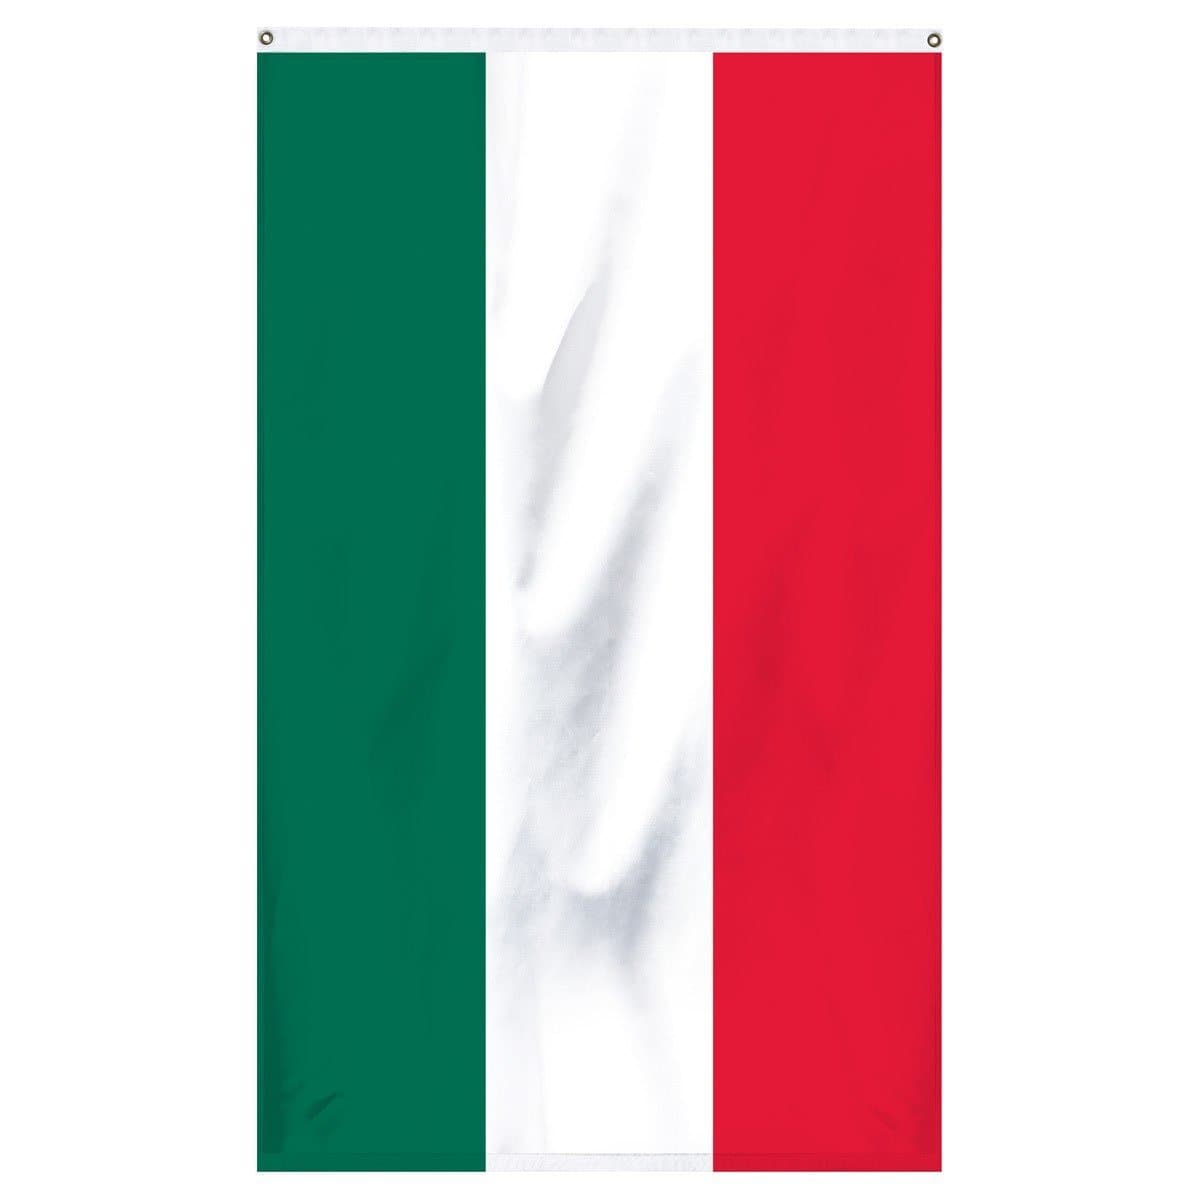 The flag of Hungary for sale online for parades and flagpoles